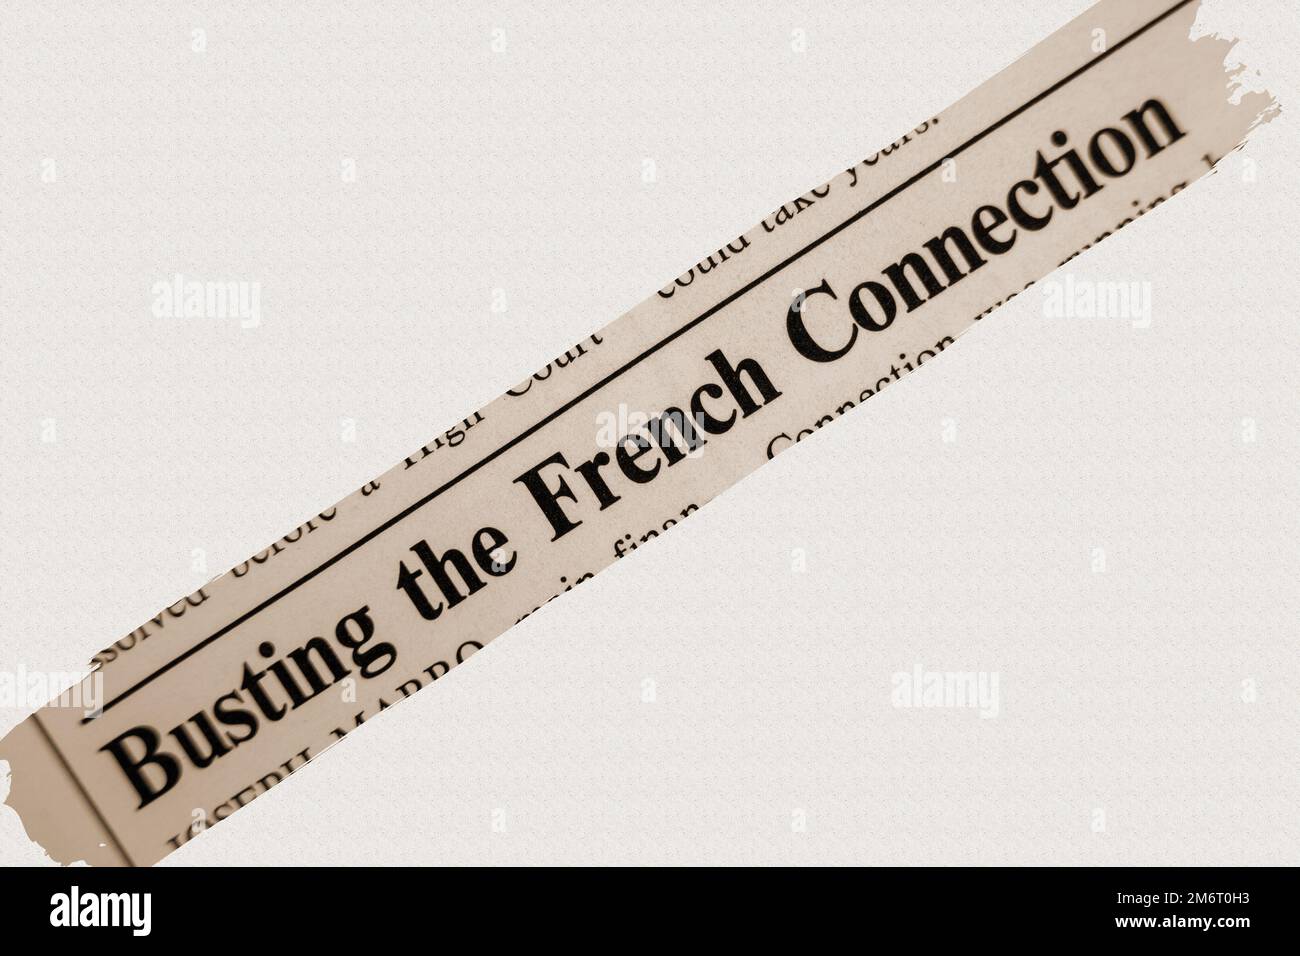 news story from 1975 newspaper headline article title - Busting the French Connection in sepia Stock Photo